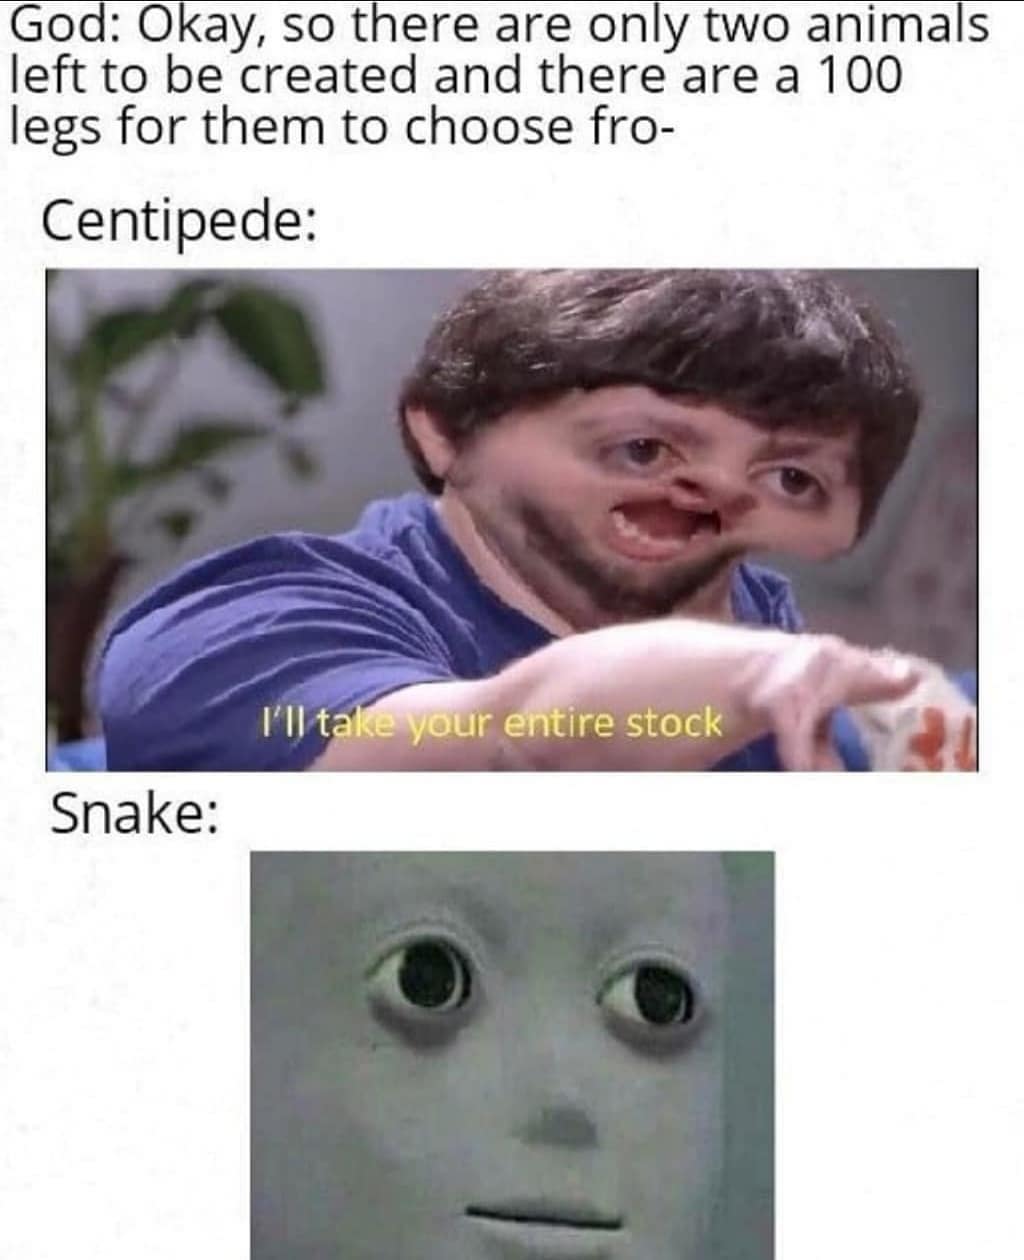 centipede snake meme - God Okay, so there are only two animals left to be created and there are a 100 legs for them to choose fro Centipede I'll take your entire stock Snake